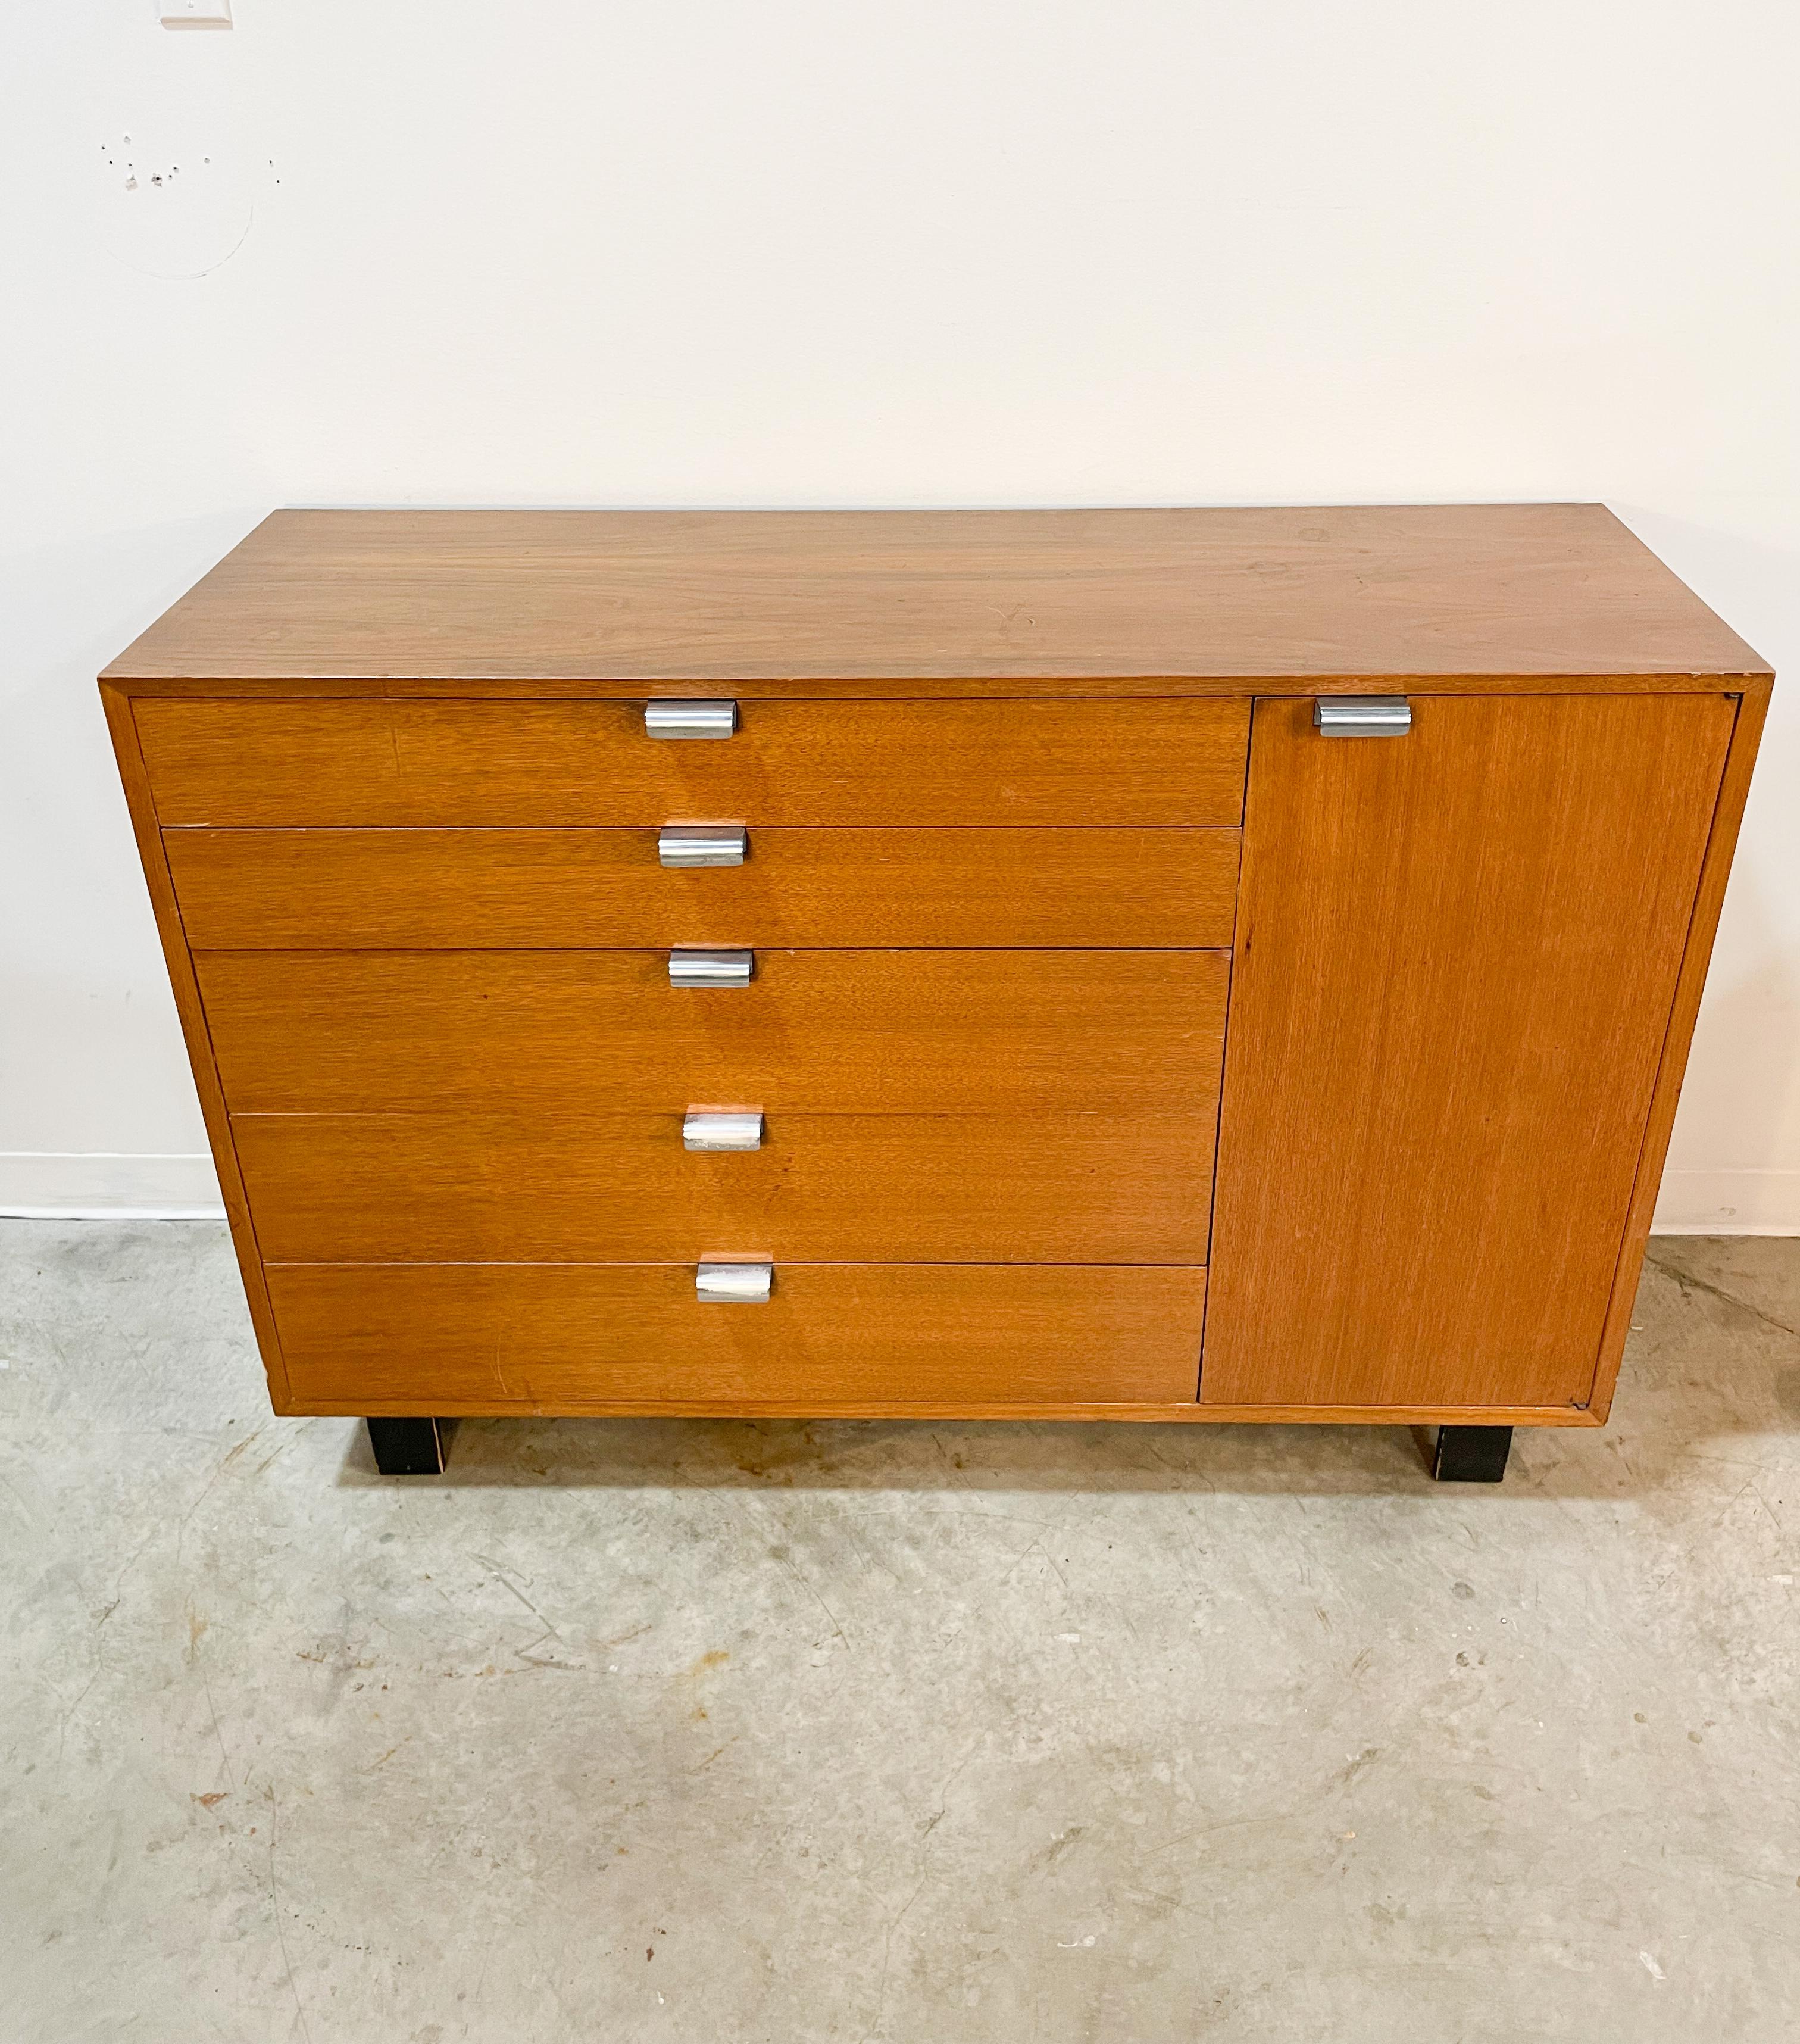 Tall dresser combo designed by George Nelson for the BCS line made by Herman Miller in the late 1940s. Featuring excellent storage over five drawers and a separate cupboard with three adjustable shelves, this walnut and polished aluminum cabinet is